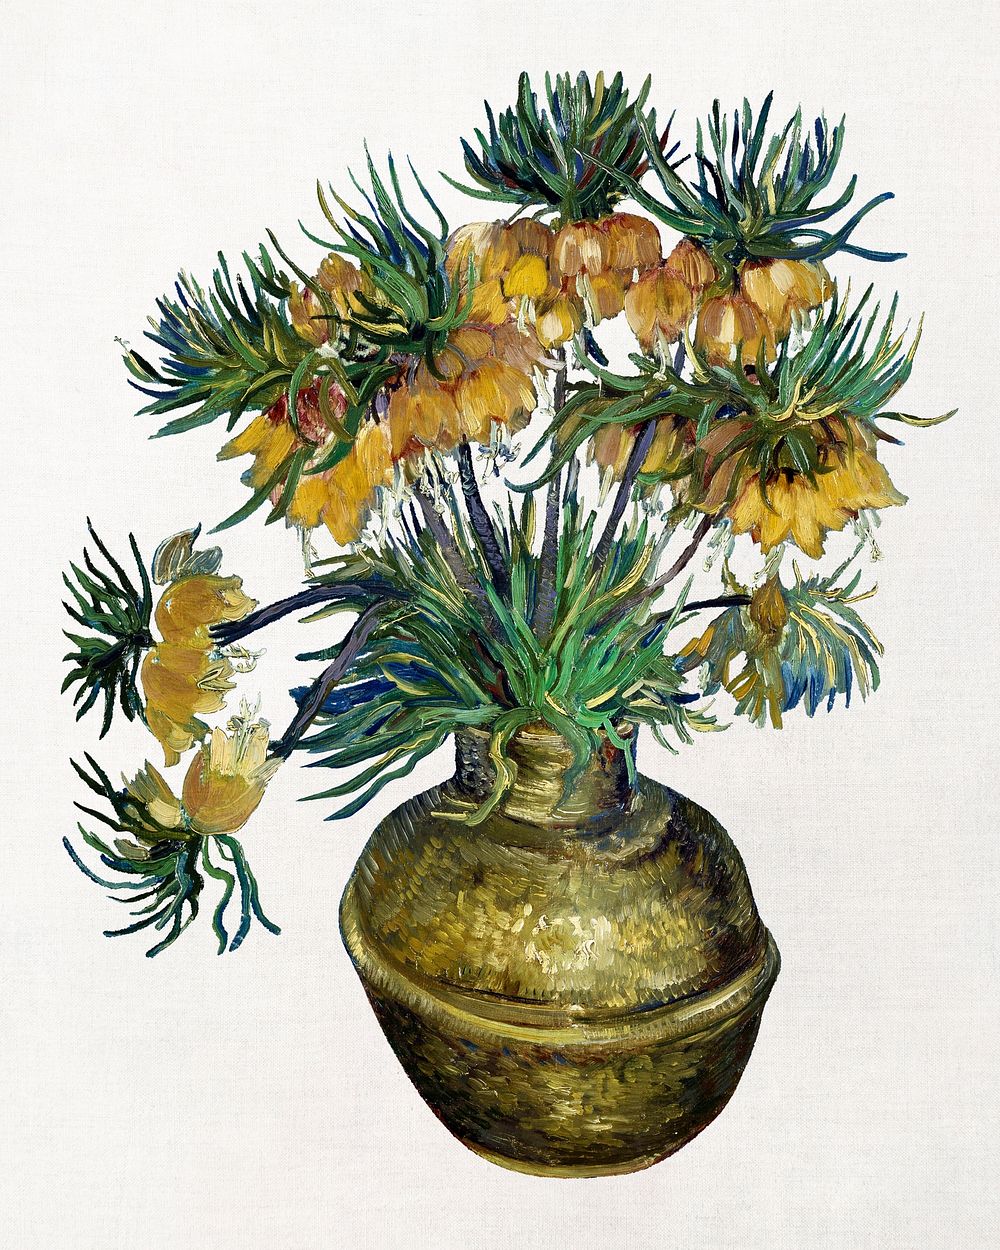 Imperial Fritillaries in a Copper Vase illustration, Van Gogh's famous flower artwork, remastered by rawpixel